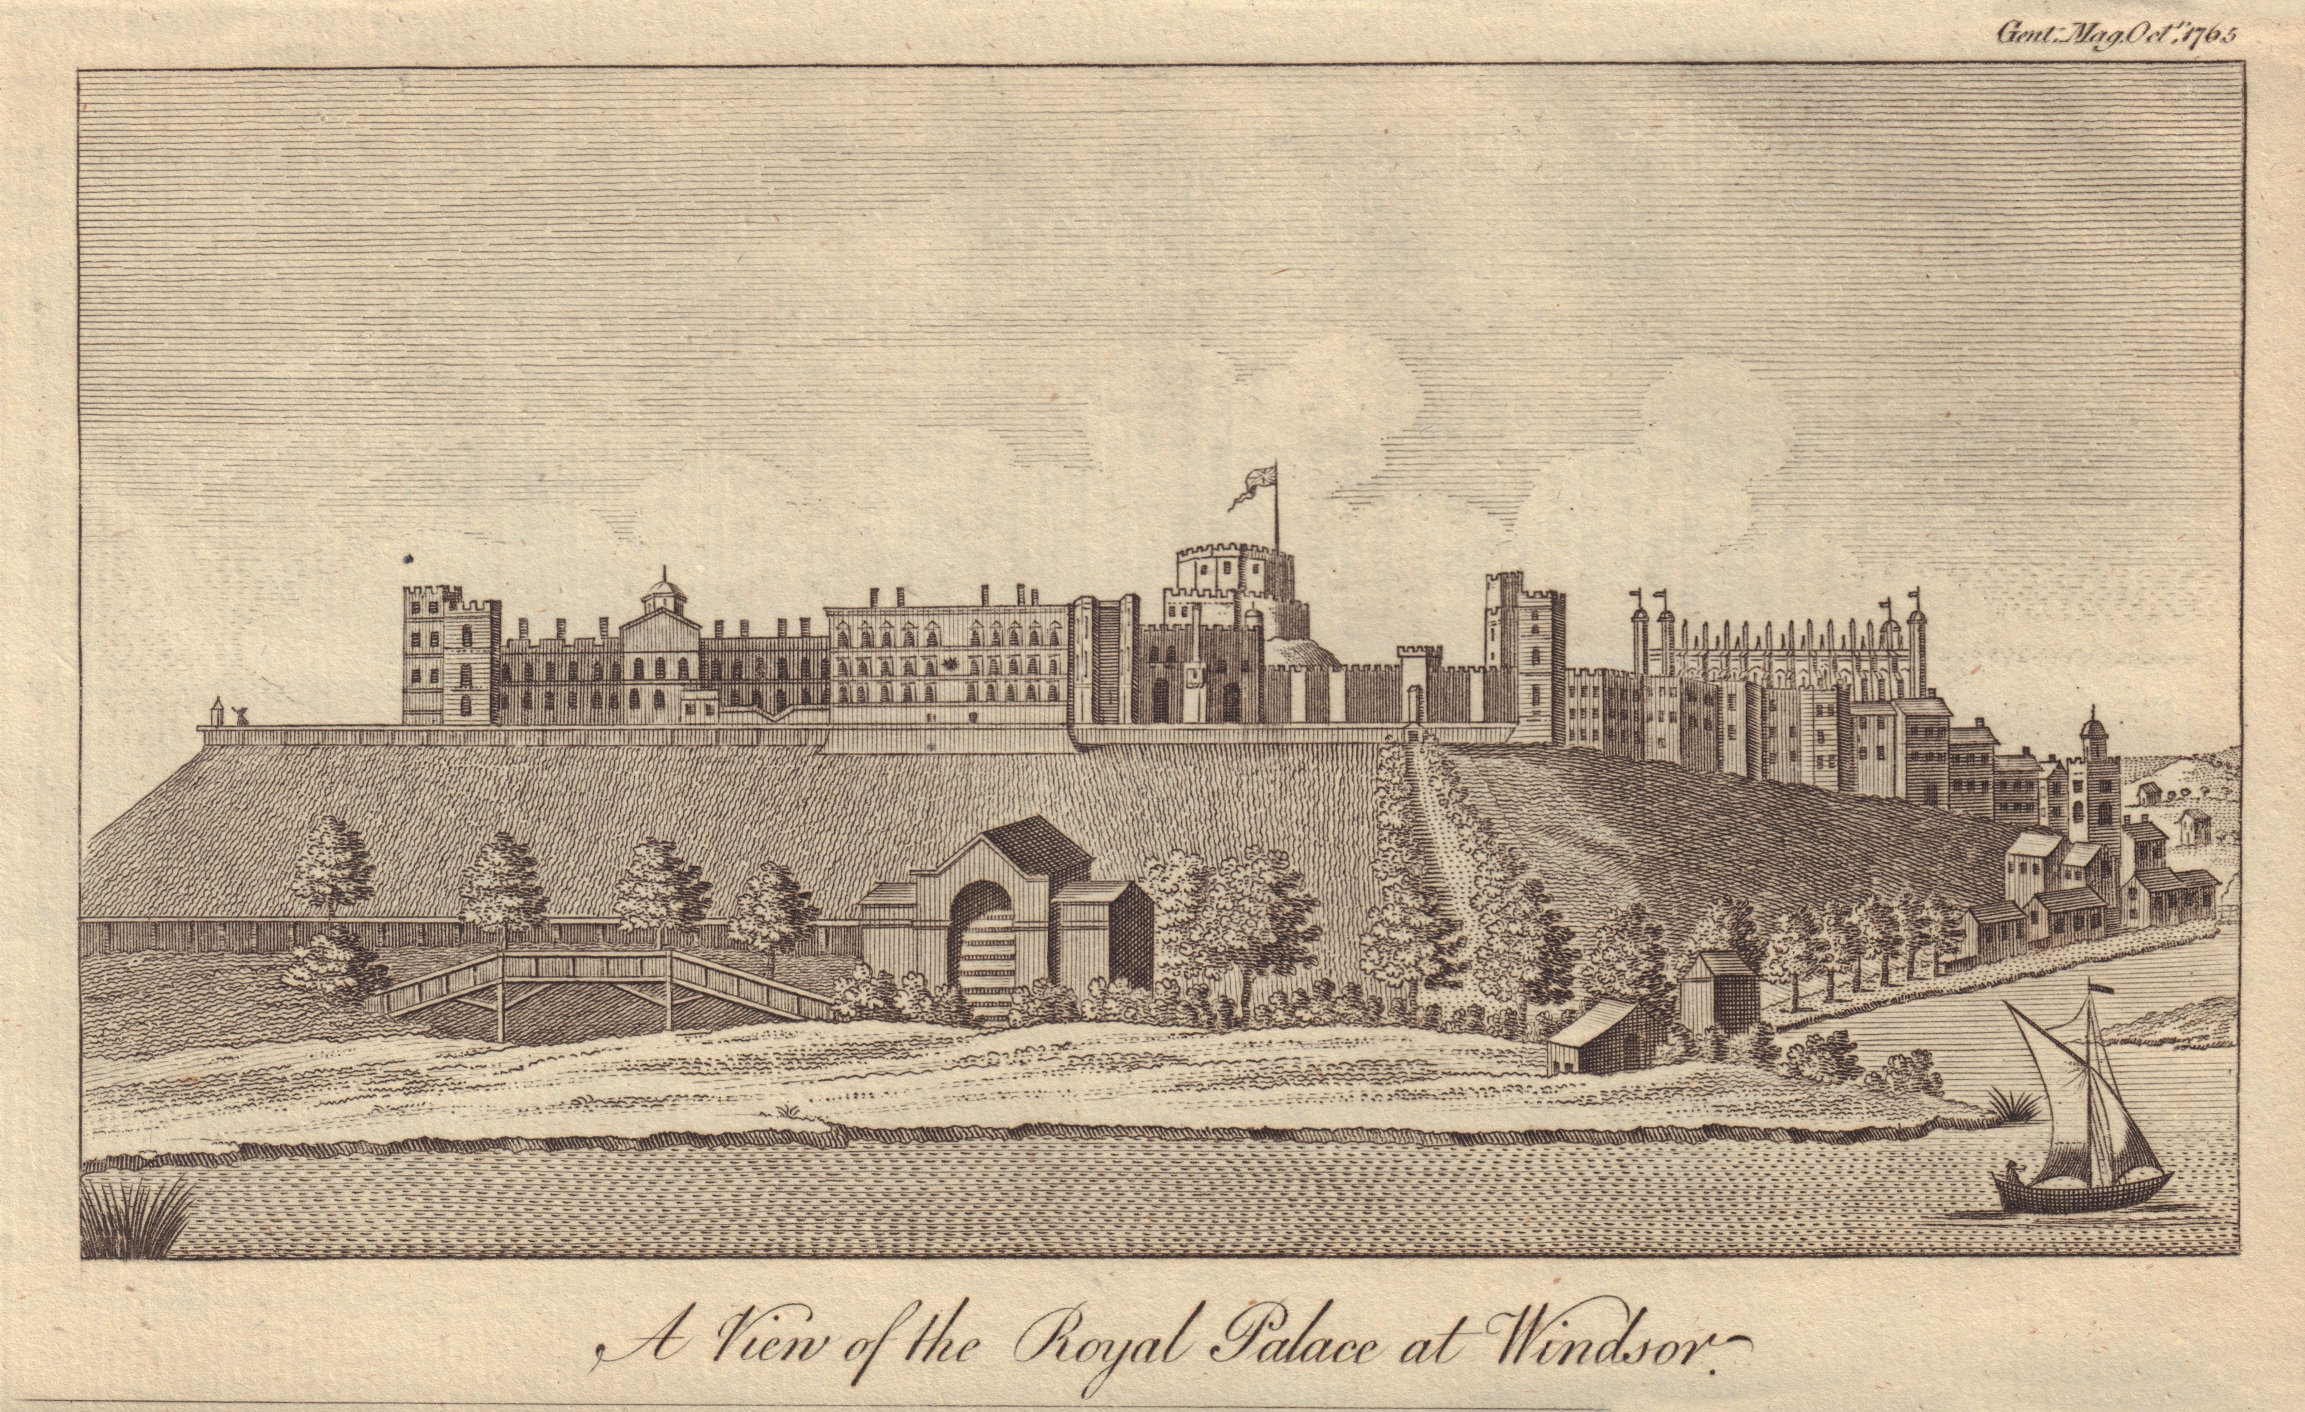 Associate Product A View of the Royal Palace at Windsor. Castle. GENTS MAG 1765 old print